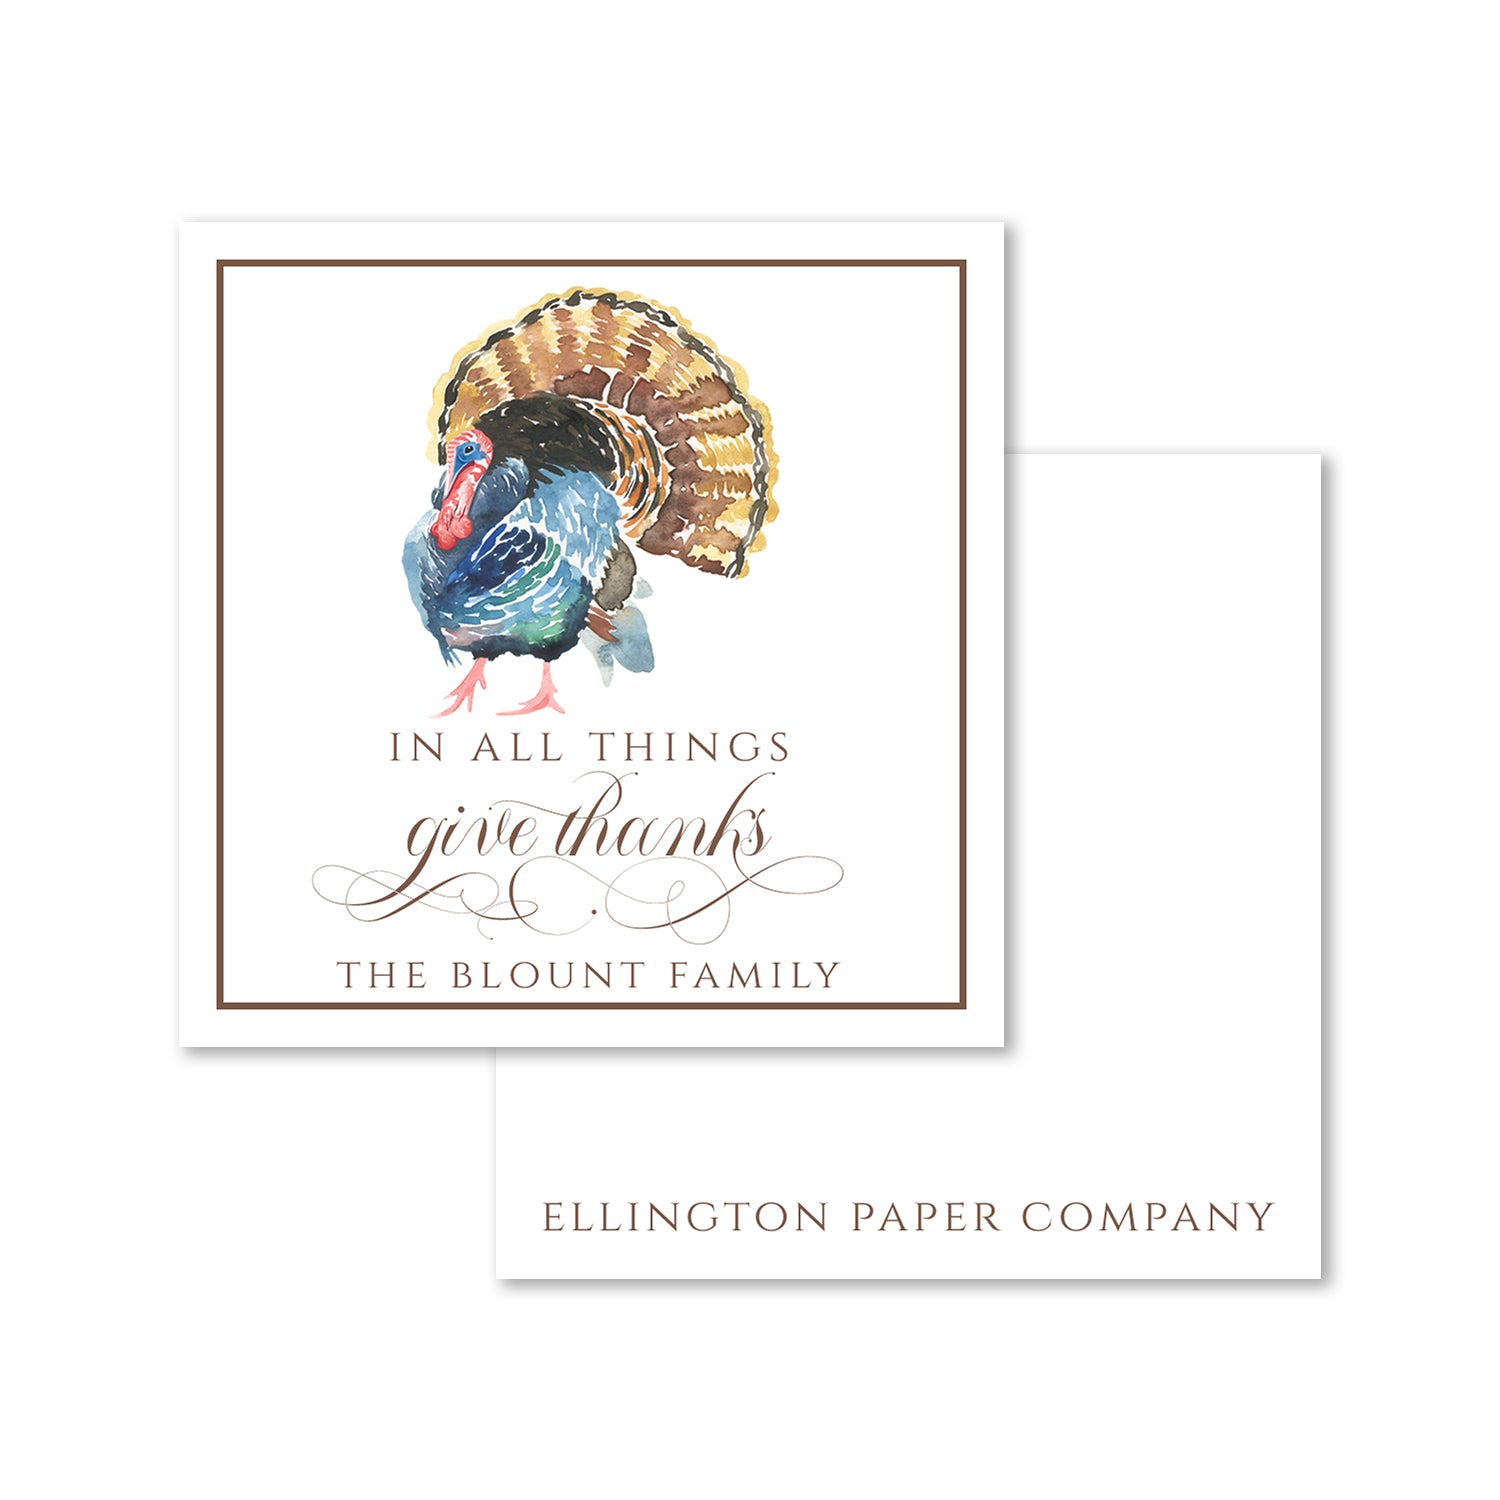 "Give Thanks" Turkey Enclosure Cards and Stickers